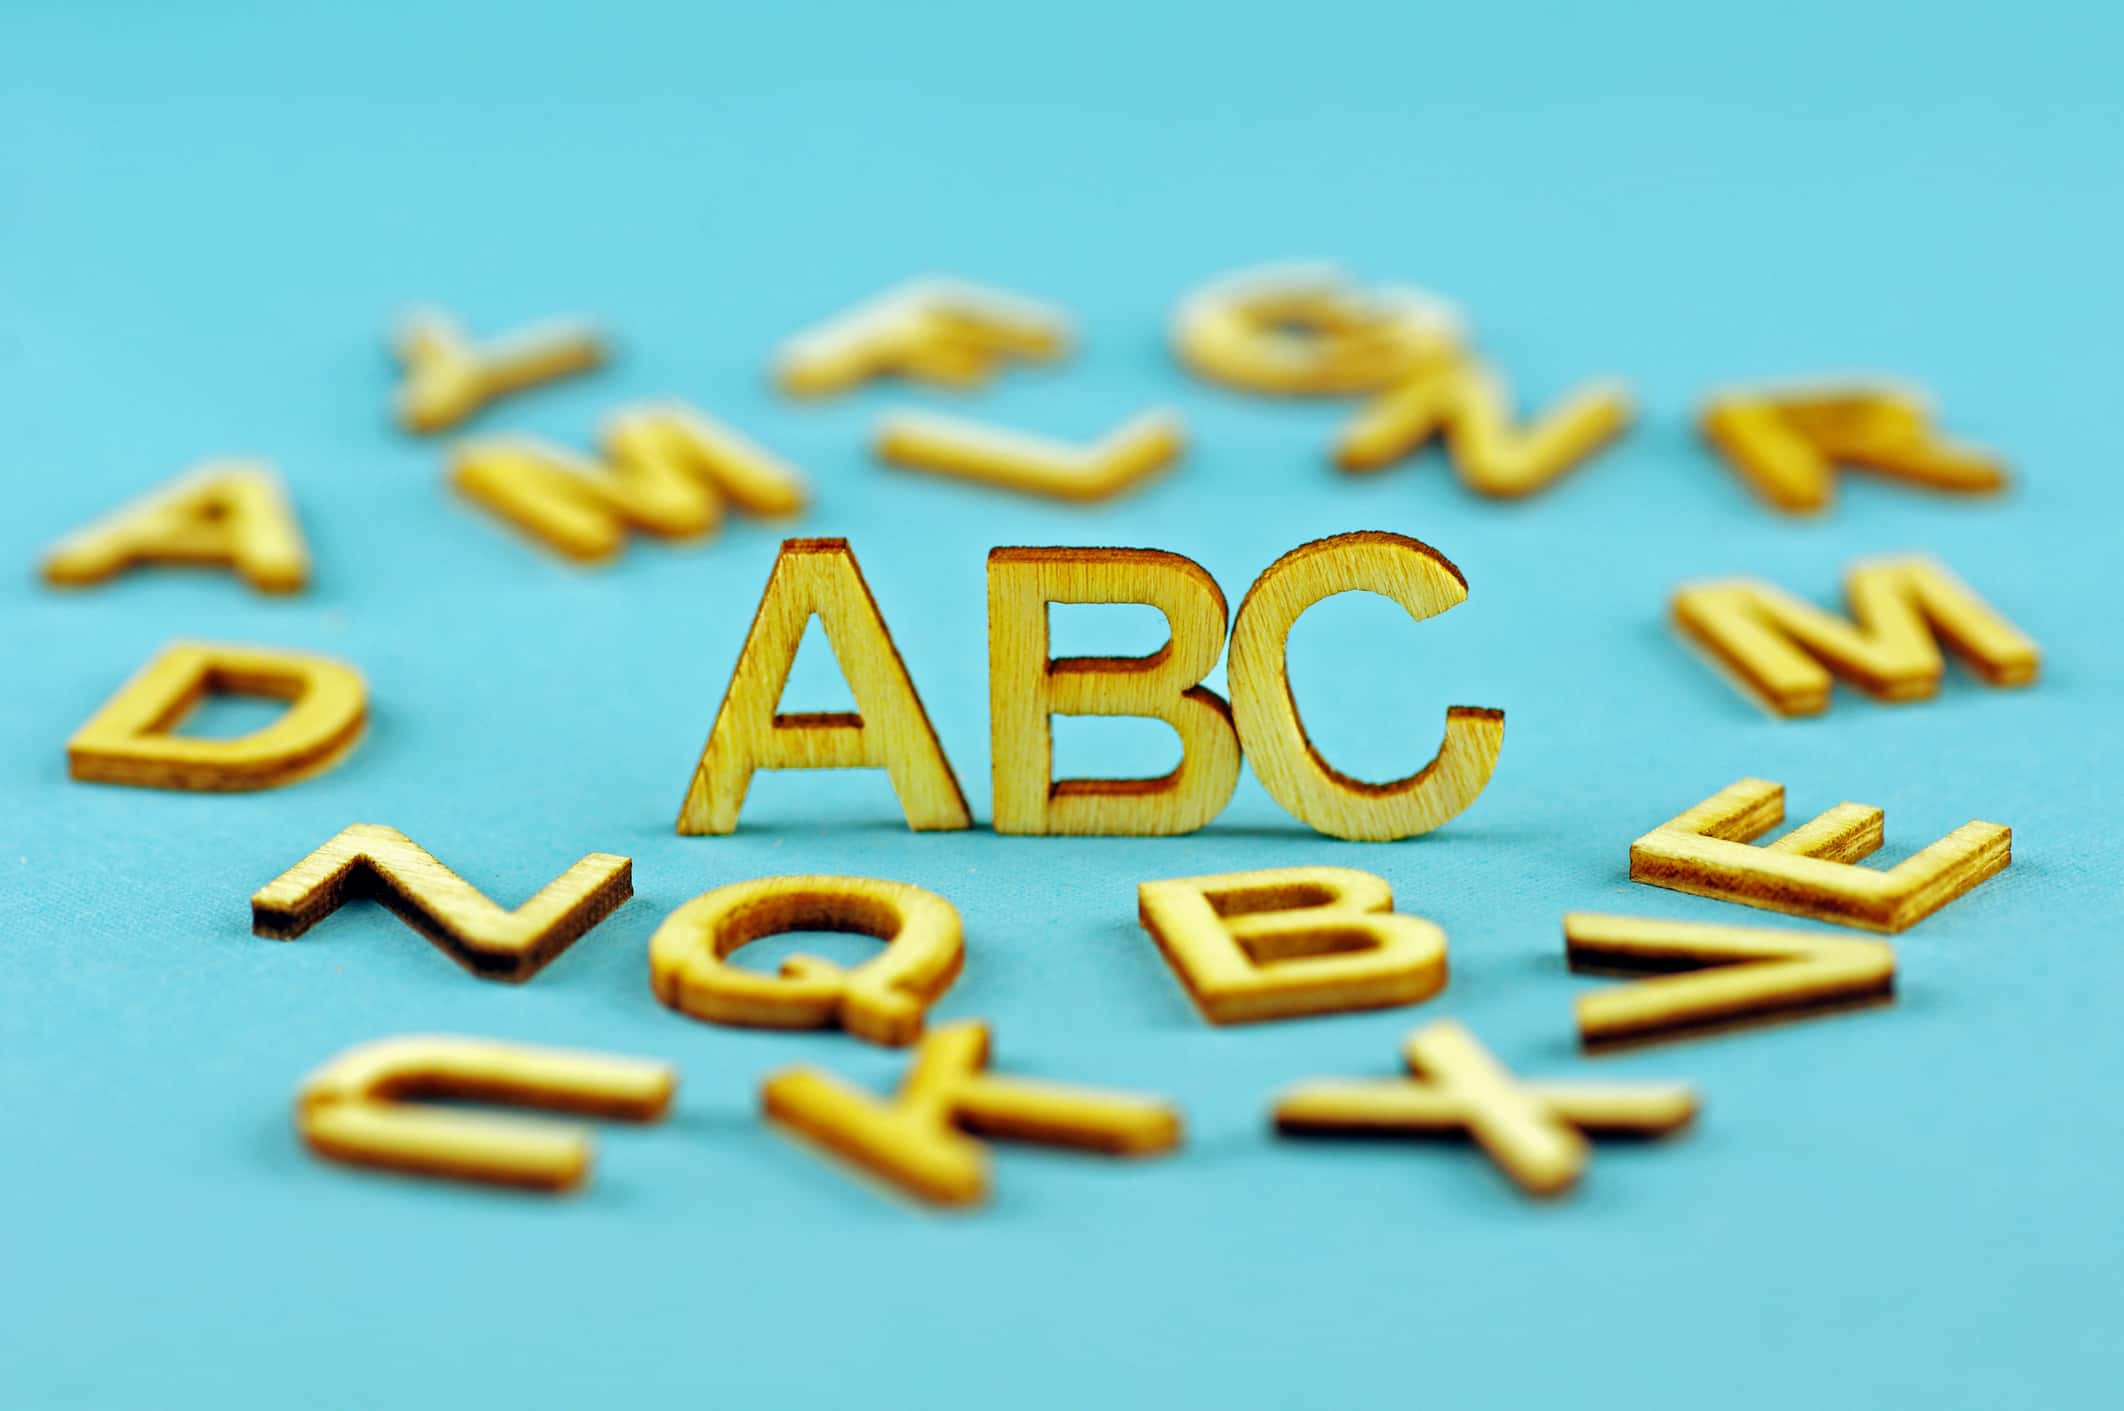 Wooden Letters With Focus On 'ABC'